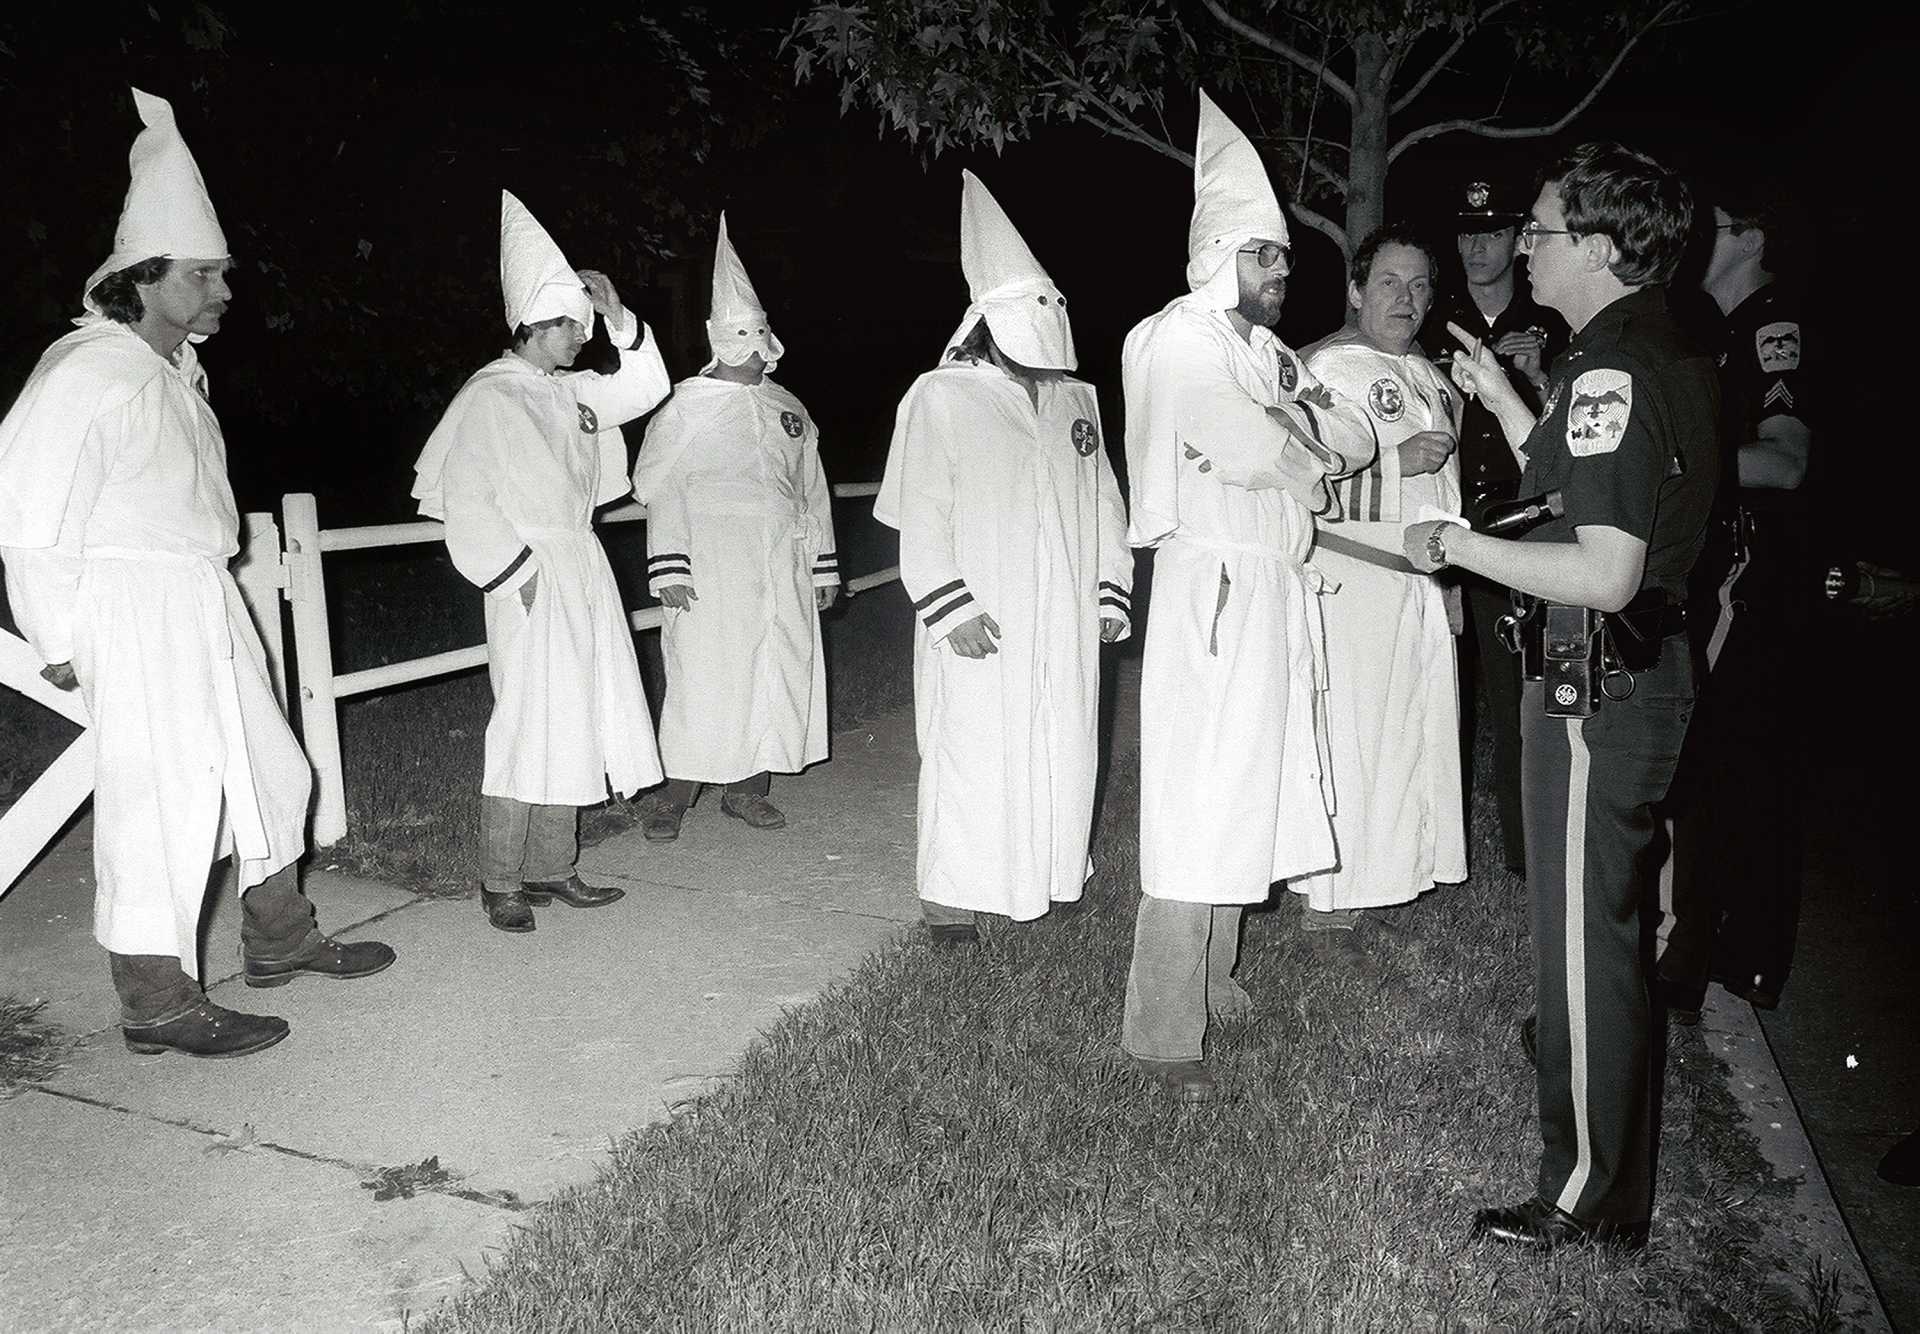 Ku Klux Klansmen are questioned by Danbury police for riding up and down Main Street shouting racial obscenities and advertising an upcoming rally in the city. 1982